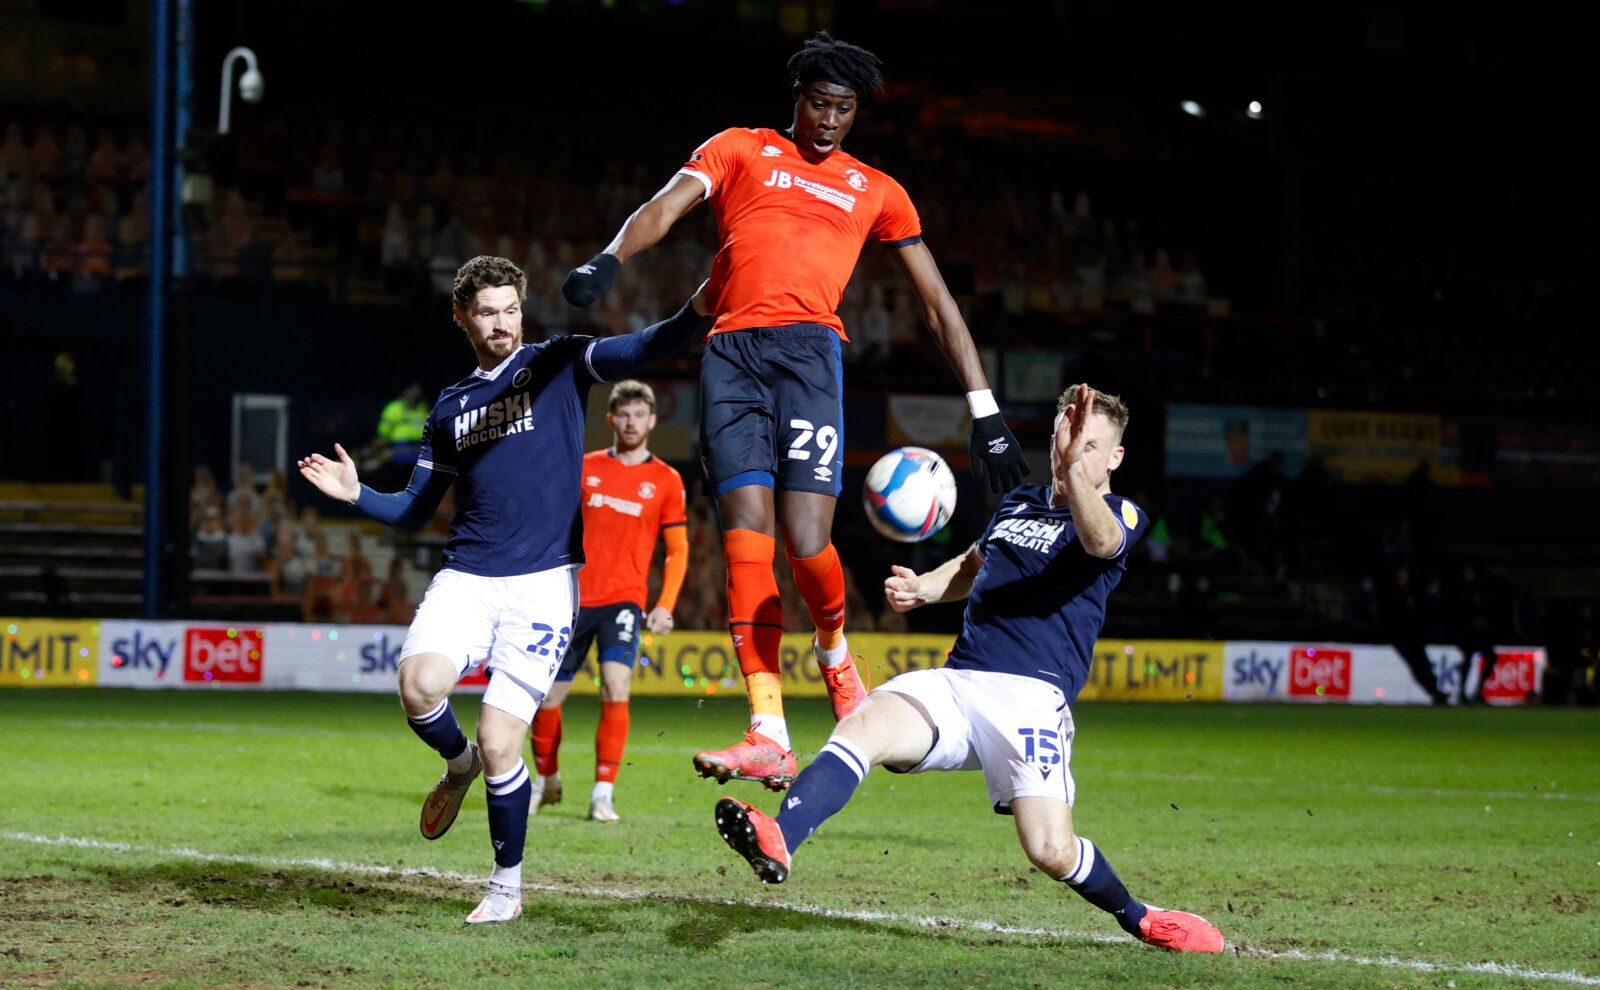 Soccer Football - Championship - Luton Town v Millwall - Kenilworth Road, Luton, Britain - February 23, 2021 Luton Town's Elijah Adebayo in action with Millwall's Alex Pearce and George Evans Action Images/John Sibley EDITORIAL USE ONLY. No use with unauthorized audio, video, data, fixture lists, club/league logos or 'live' services. Online in-match use limited to 75 images, no video emulation. No use in betting, games or single club /league/player publications.  Please contact your account repr